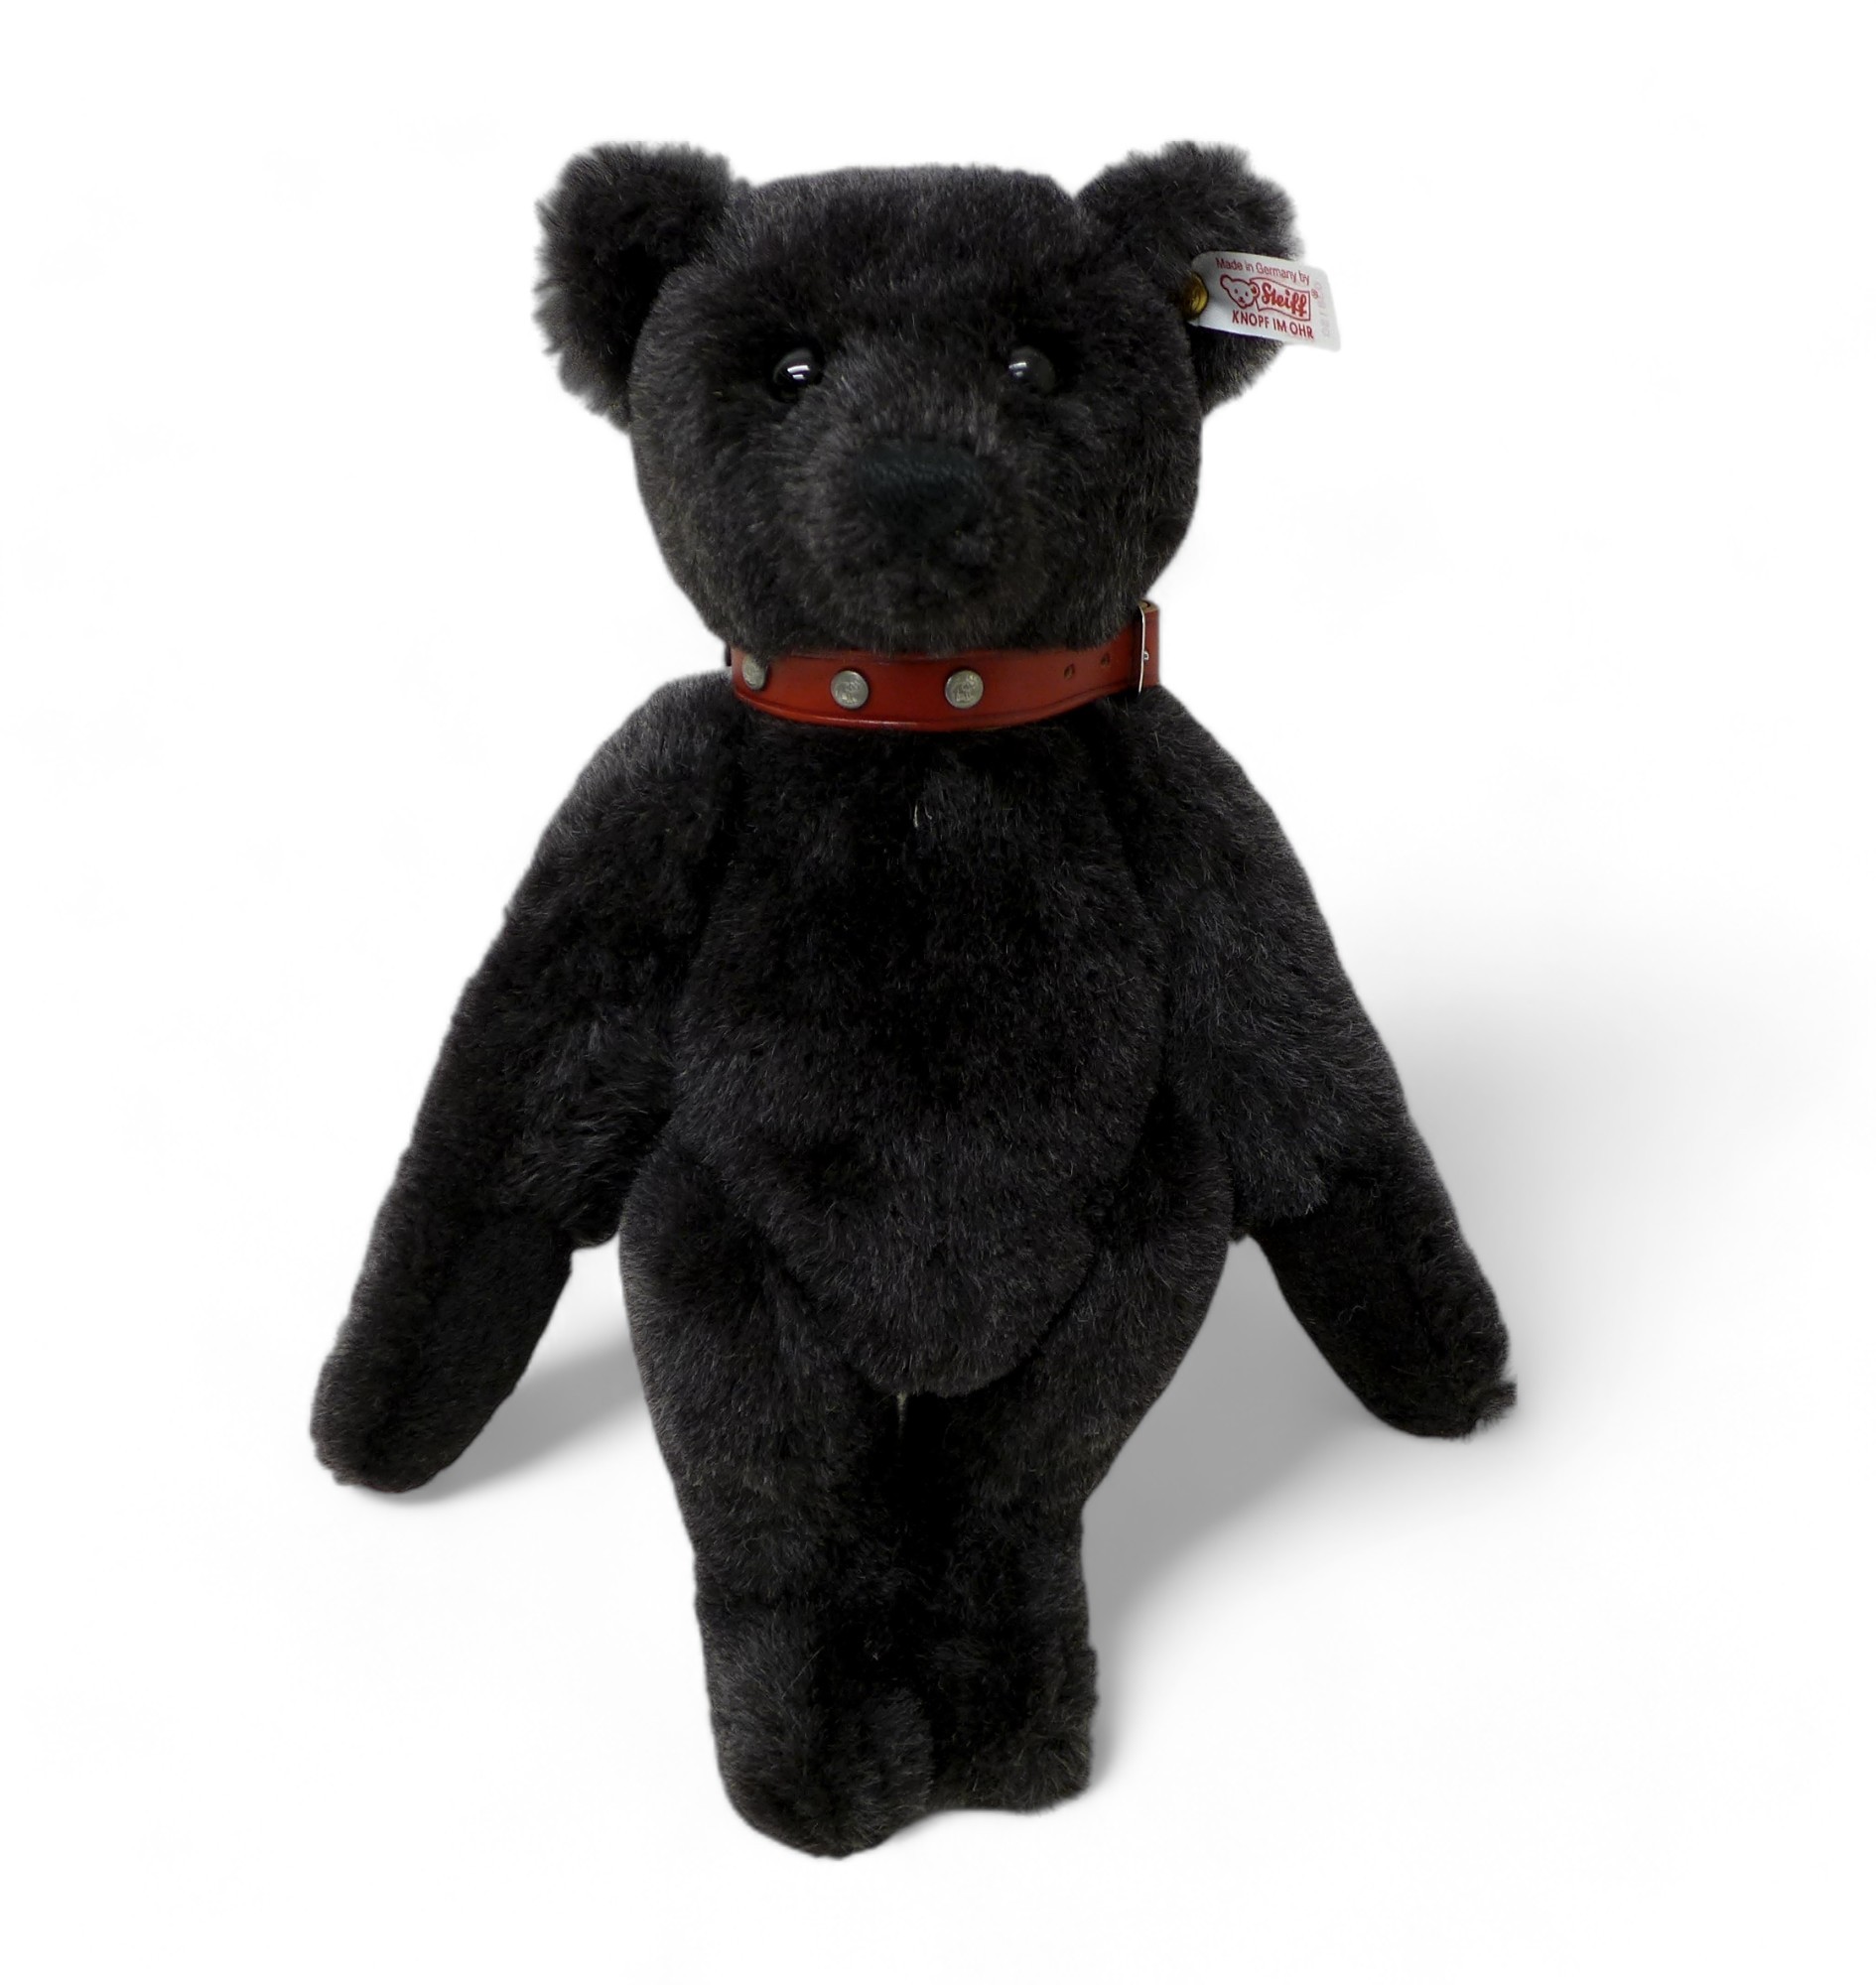 Steiff Teddy Bear Black Bear with red studded collar, Black mohair, poseable five jointed bear, - Image 3 of 13